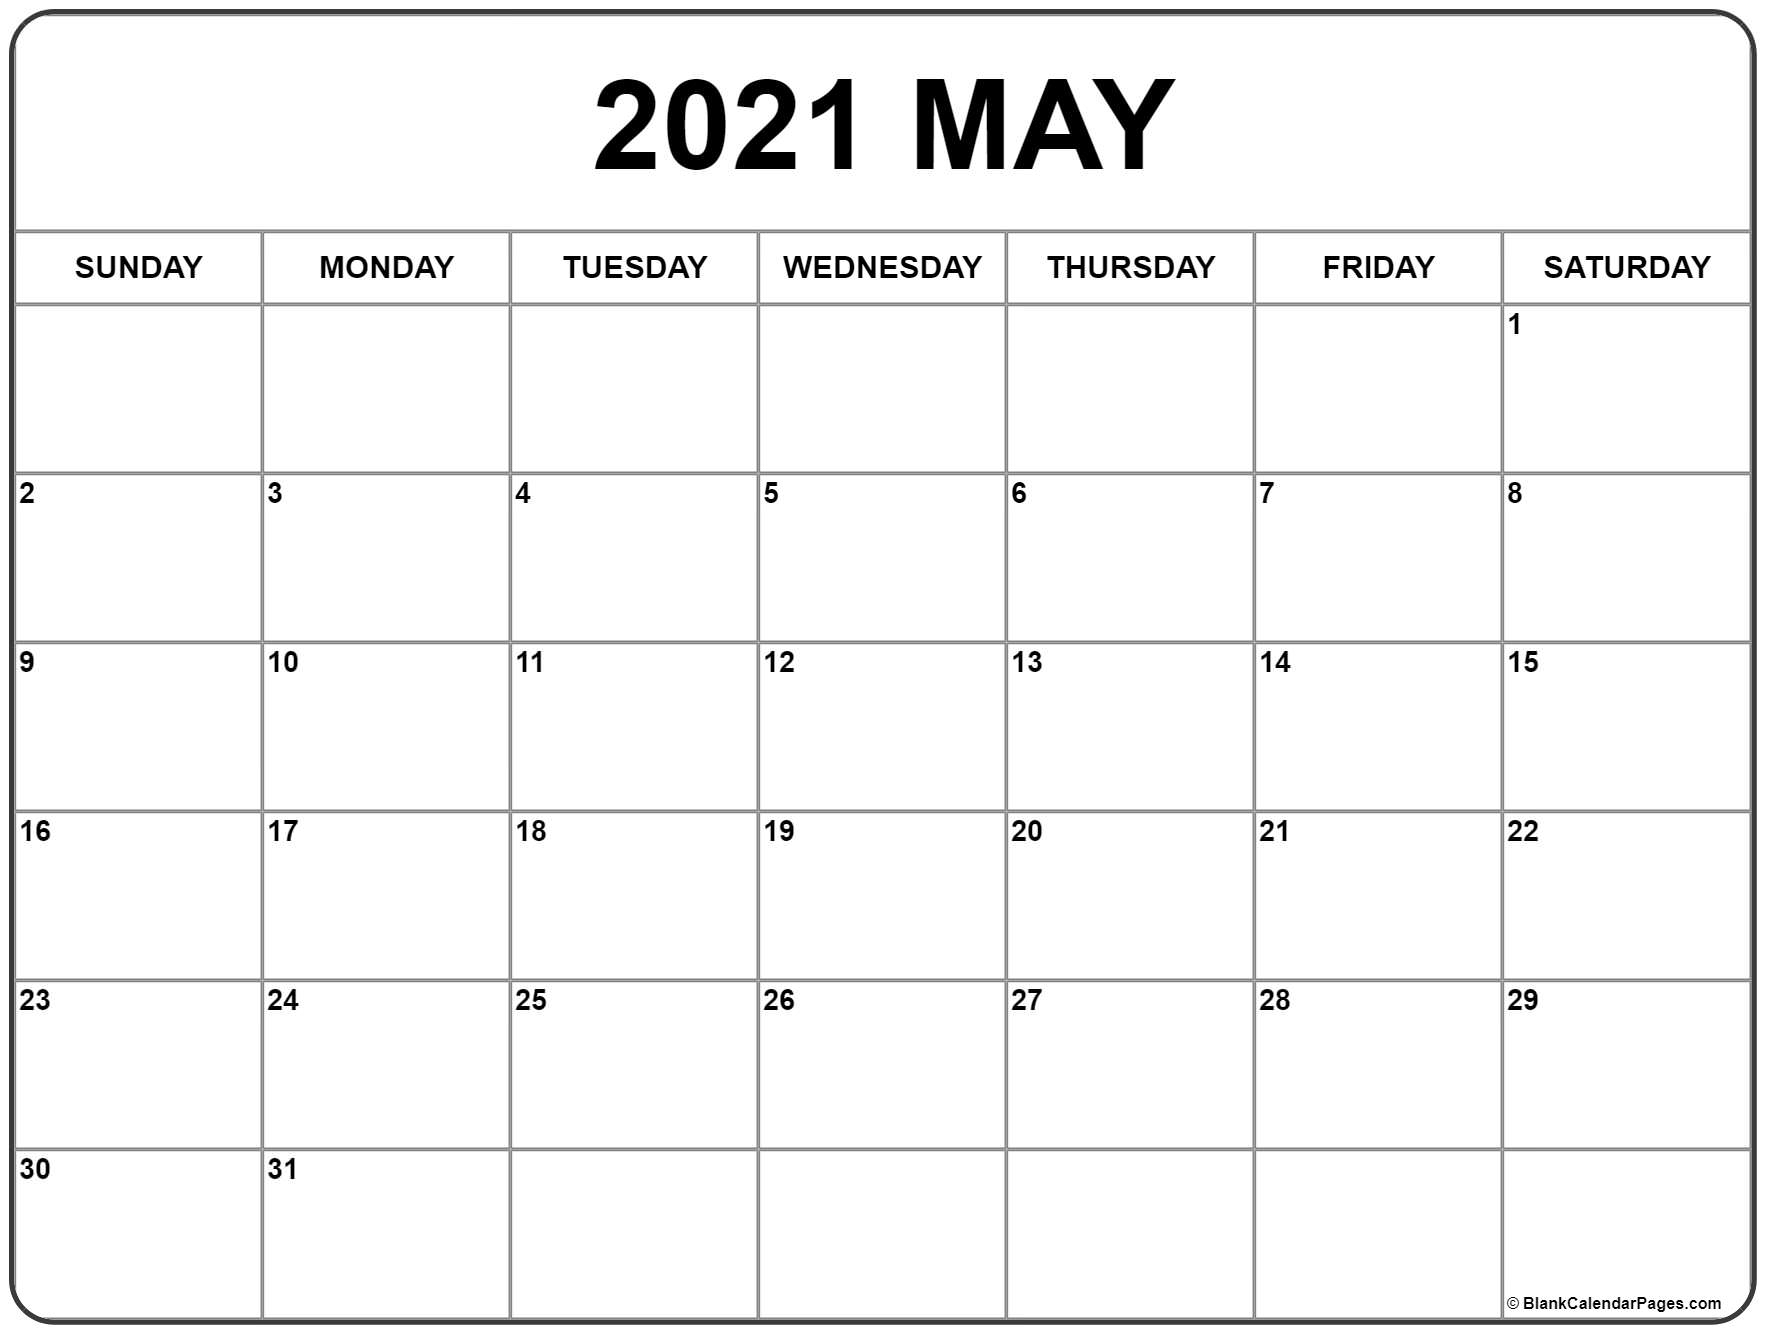 2021 Print Free Calendars Without Downloading | Calendar Printables within Calendars To Print Without Downloading